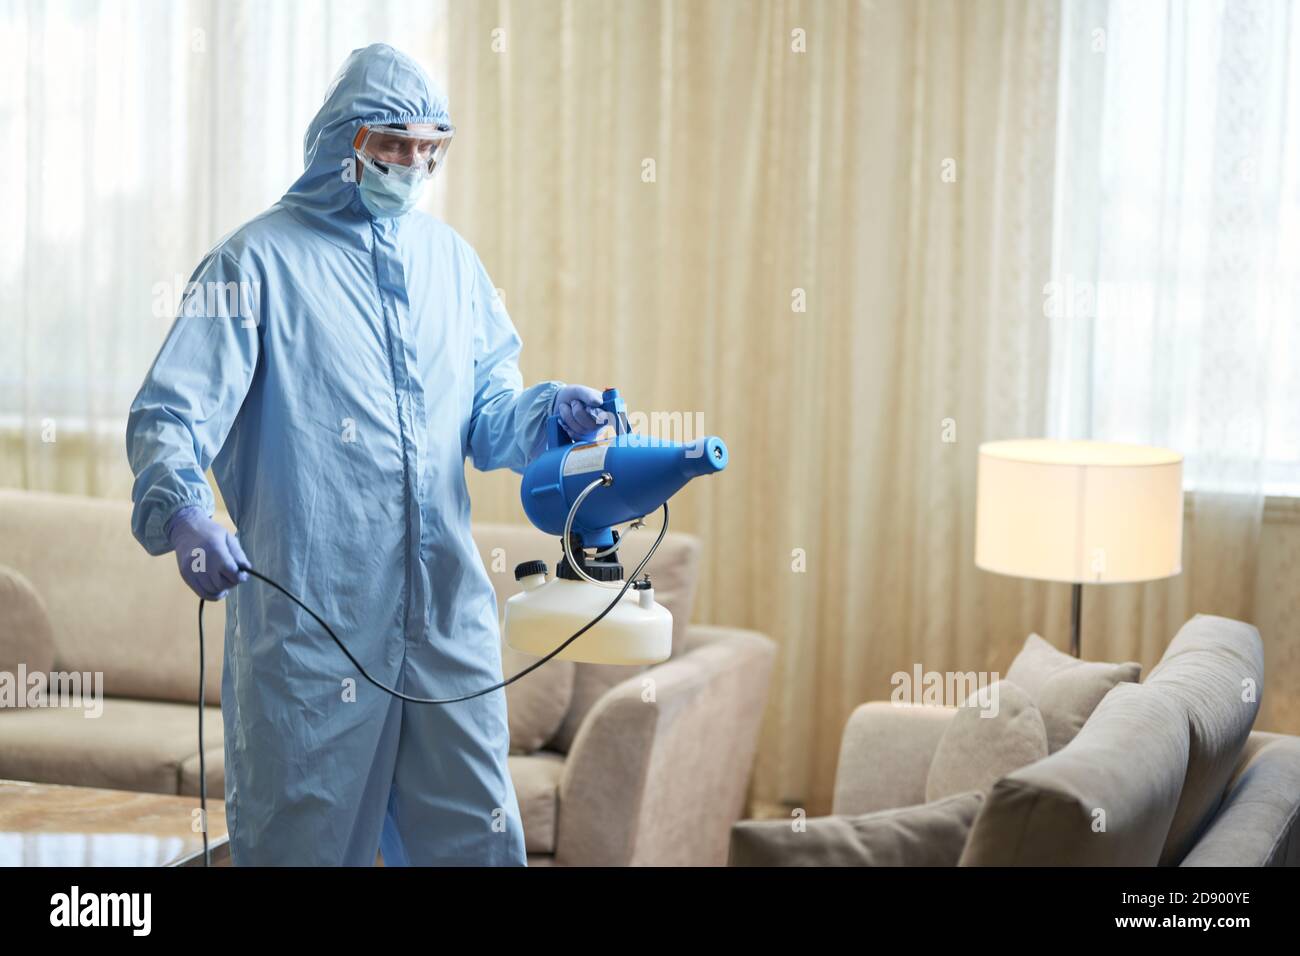 Worker wearing protective overalls and disinfecting a hotel apartment Coronavirus and quarantine concept Stock Photo